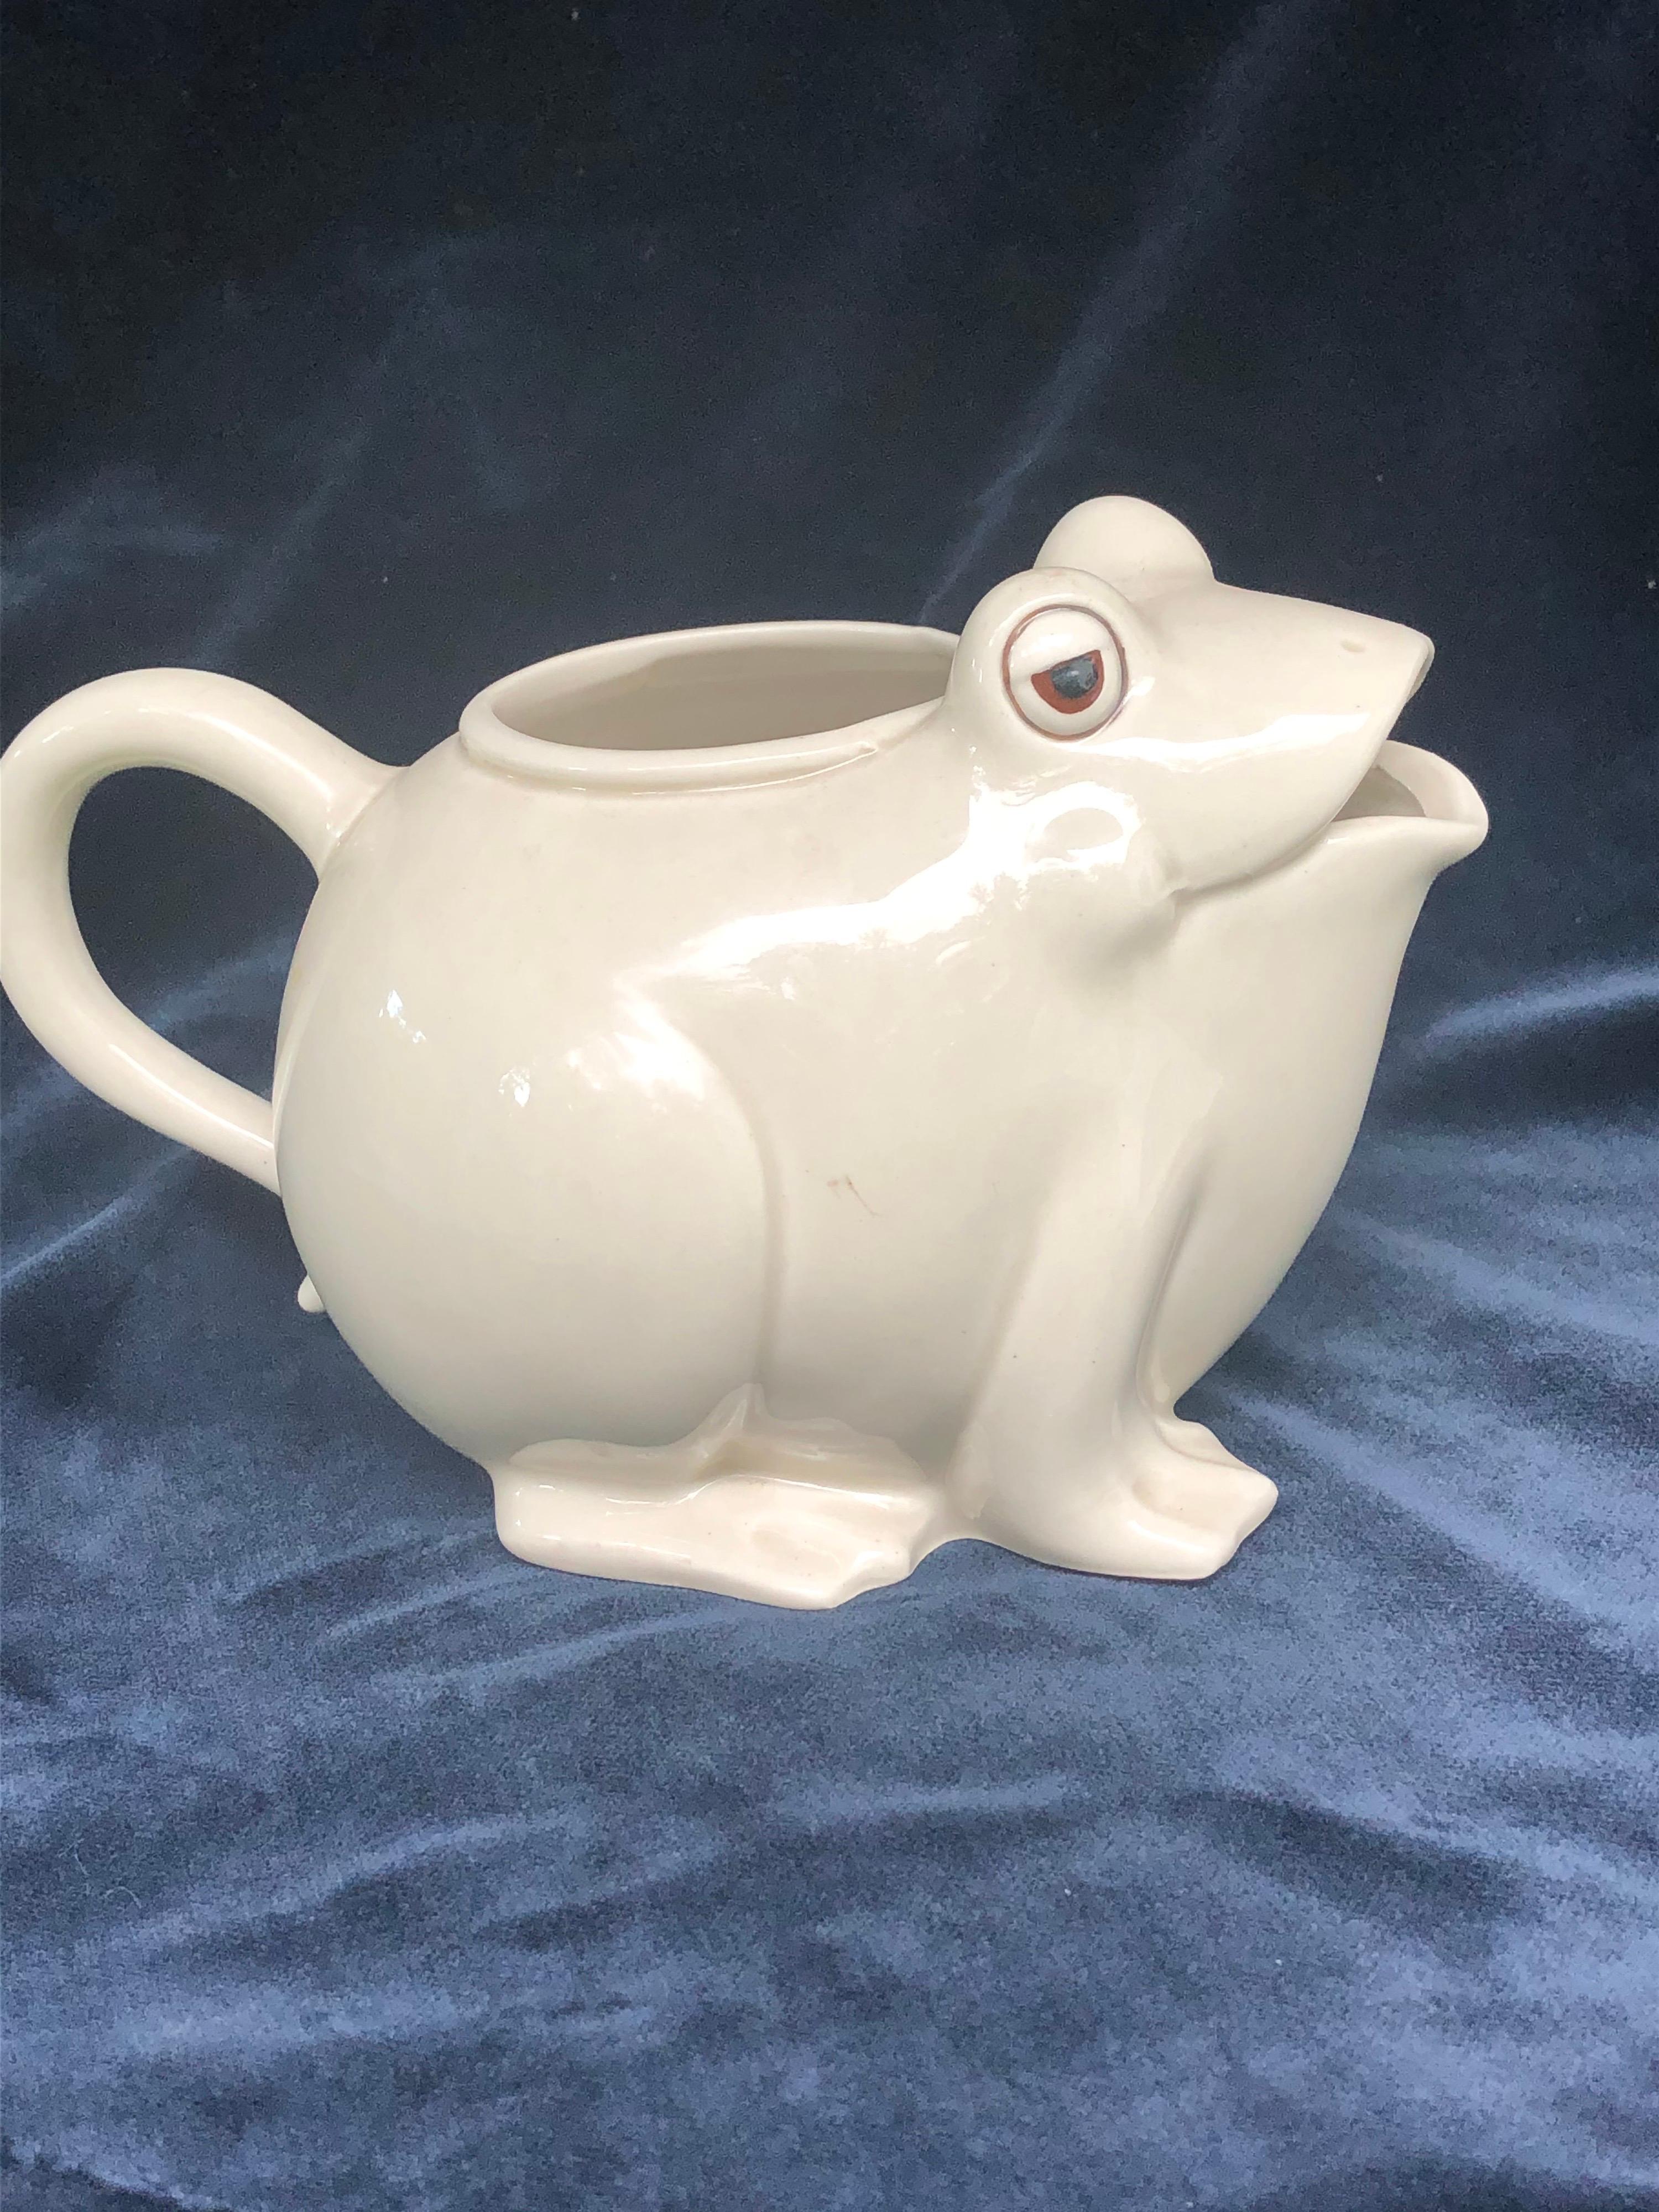 Large size Fitz & Floyd pottery frog creamer. In very good condition, no chips or dings.